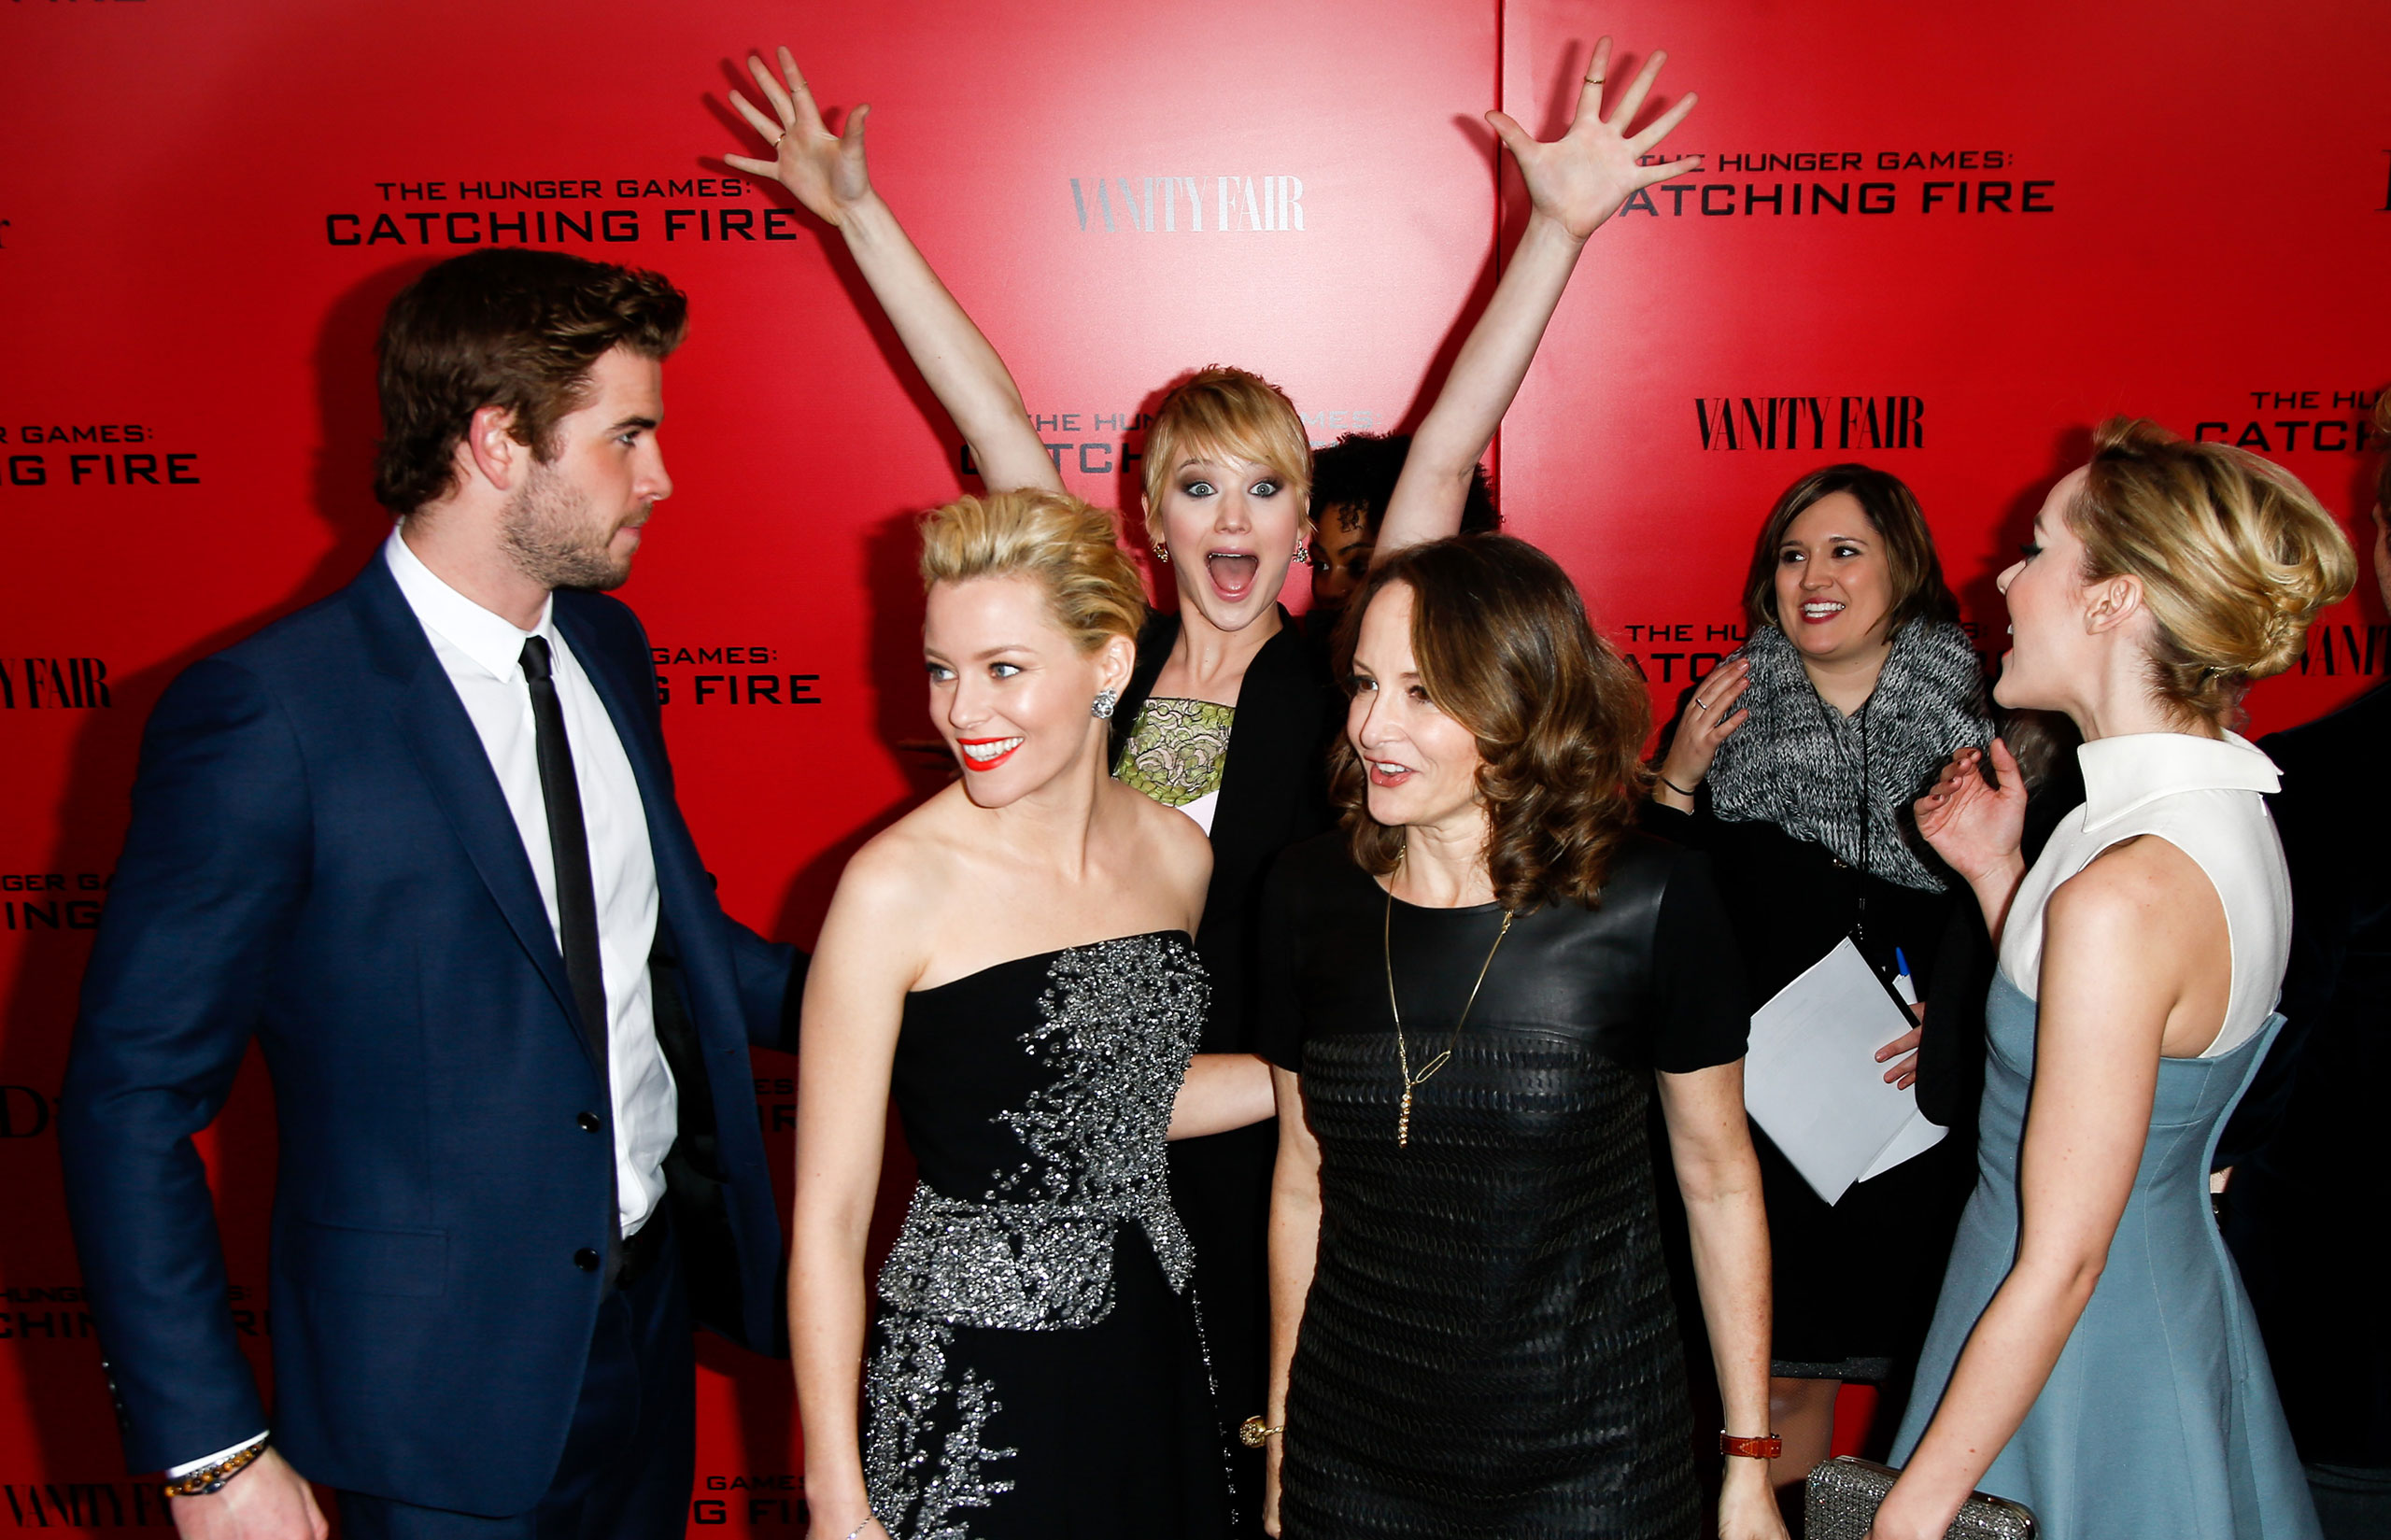 Jennifer Lawrence photobombs fellow cast members at the special screening of  The Hunger Games: Catching Fire  at the AMC Lincoln Square Theater on November 18, 2013 in New York City.